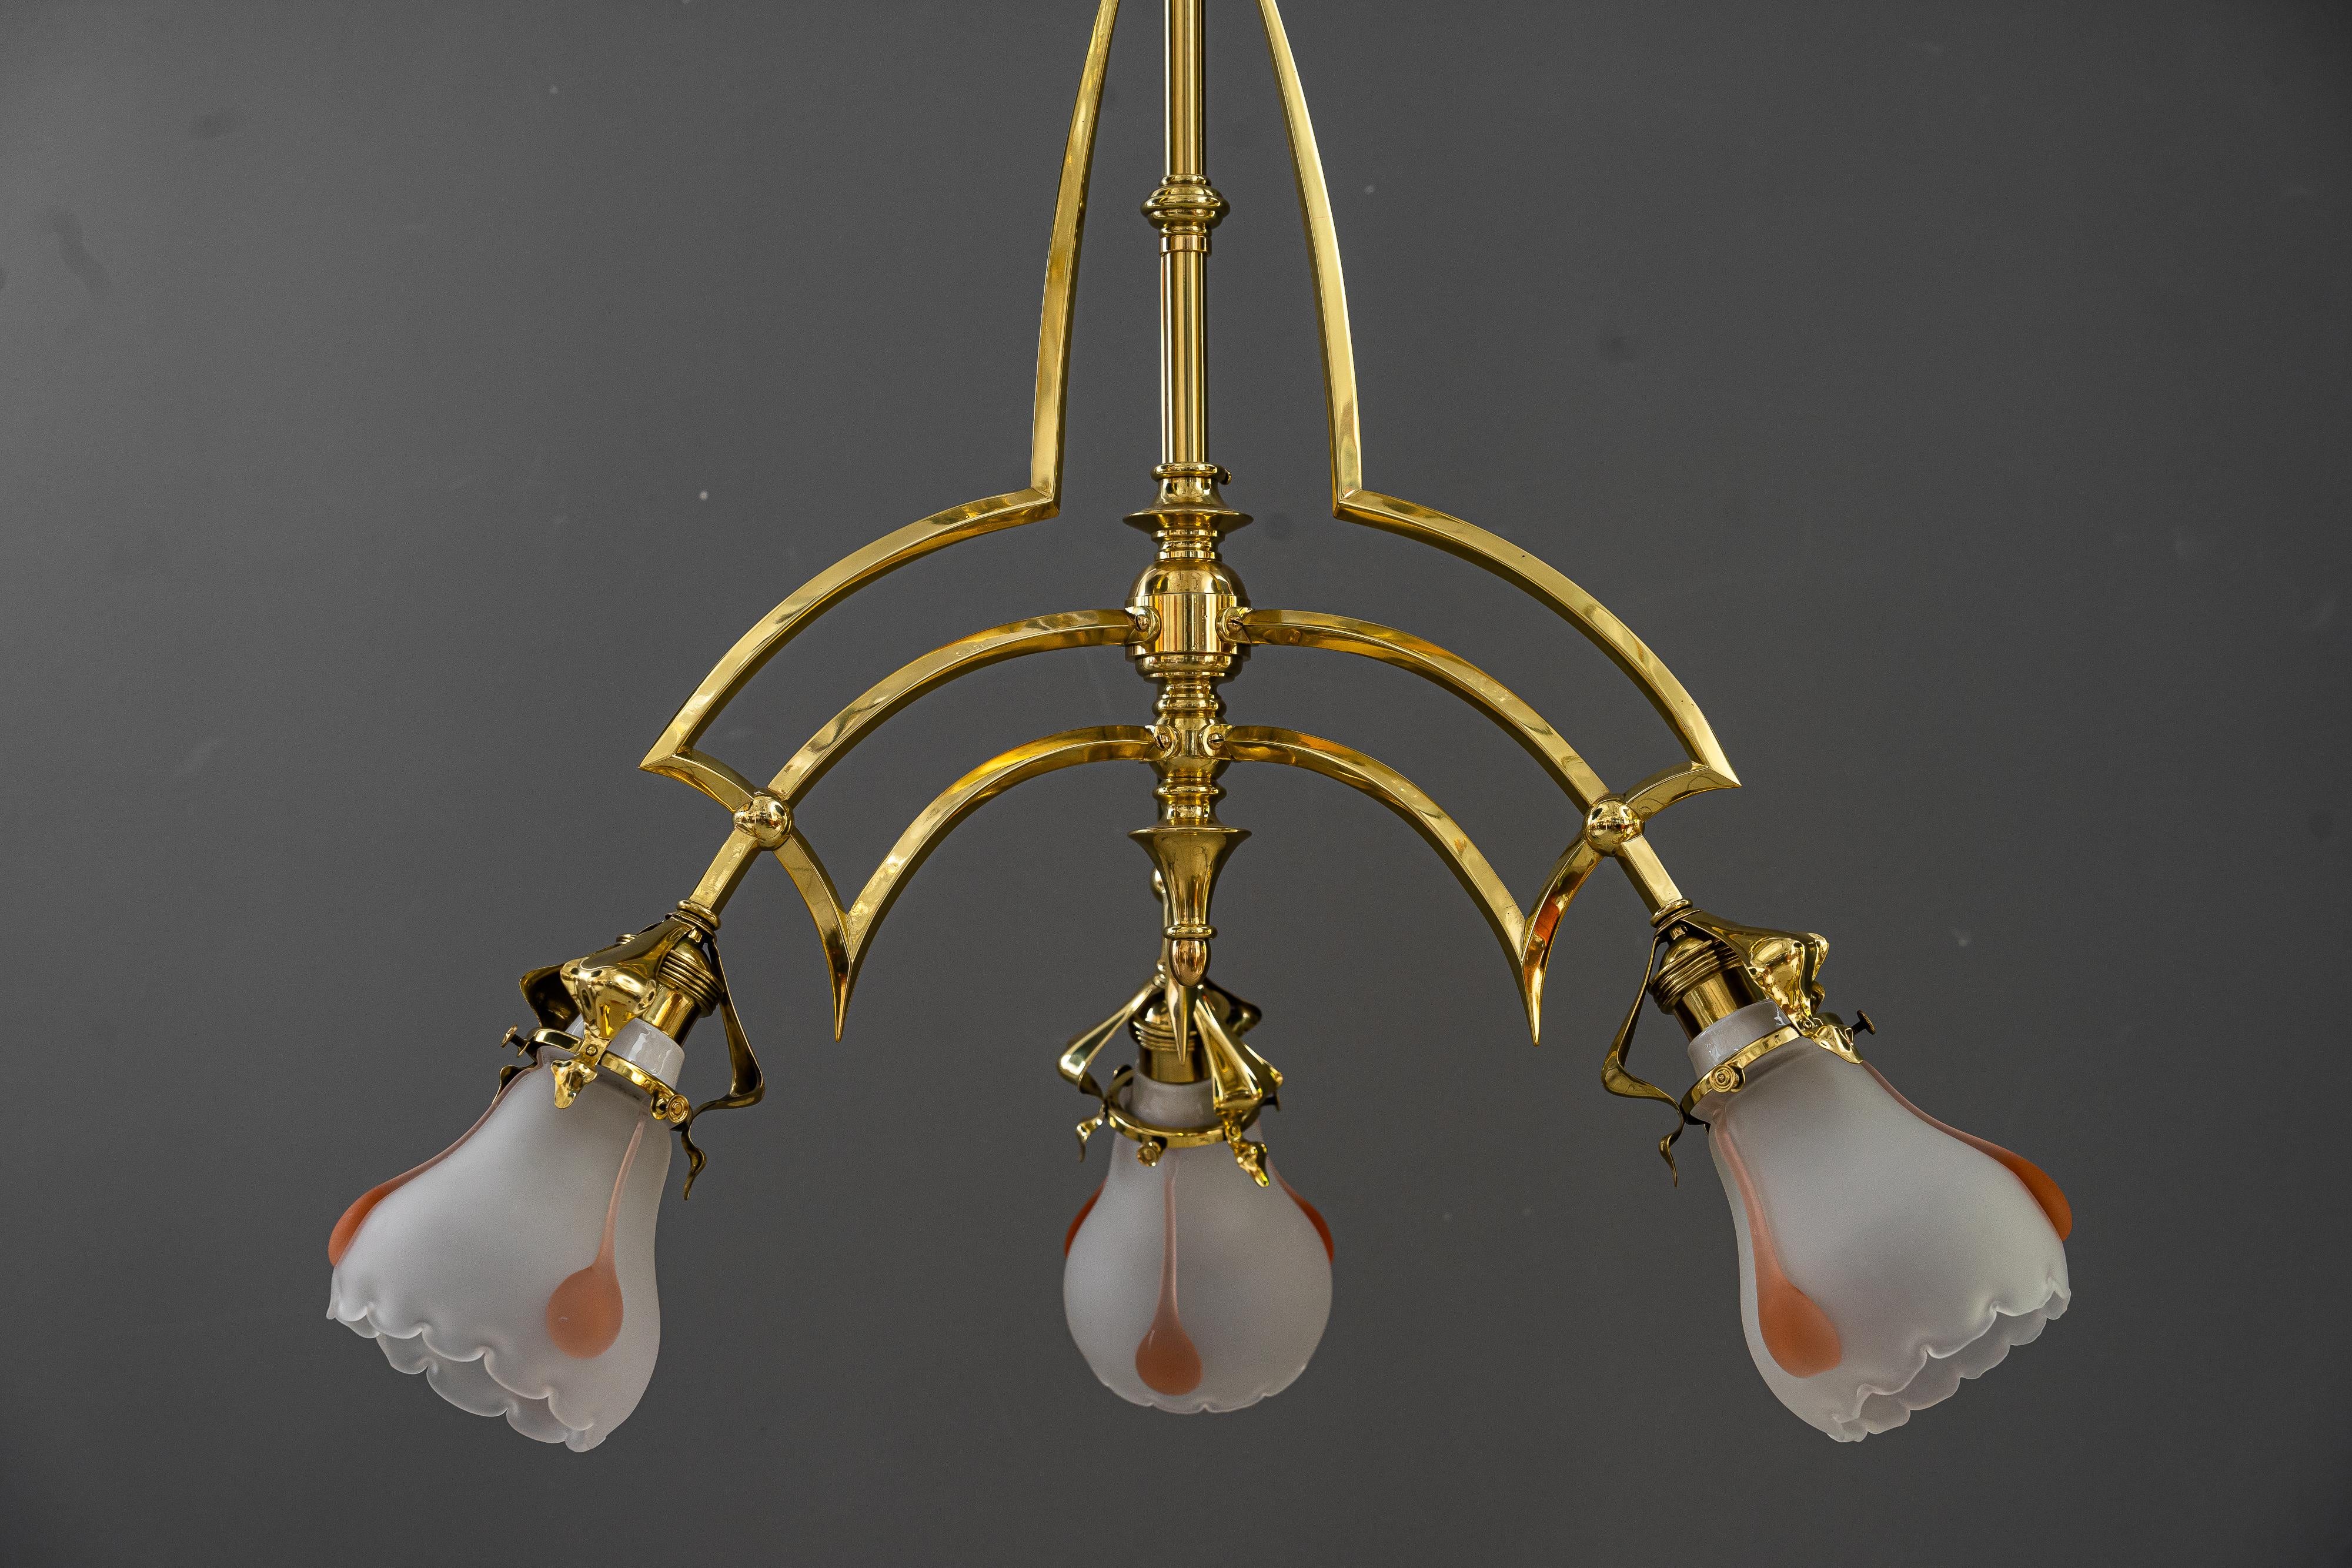 Art Deco Chandelier Vienna with Glass Shades Around 1920s
Brass parts polished and stove enamelled
Beautiful old original glass shades.
